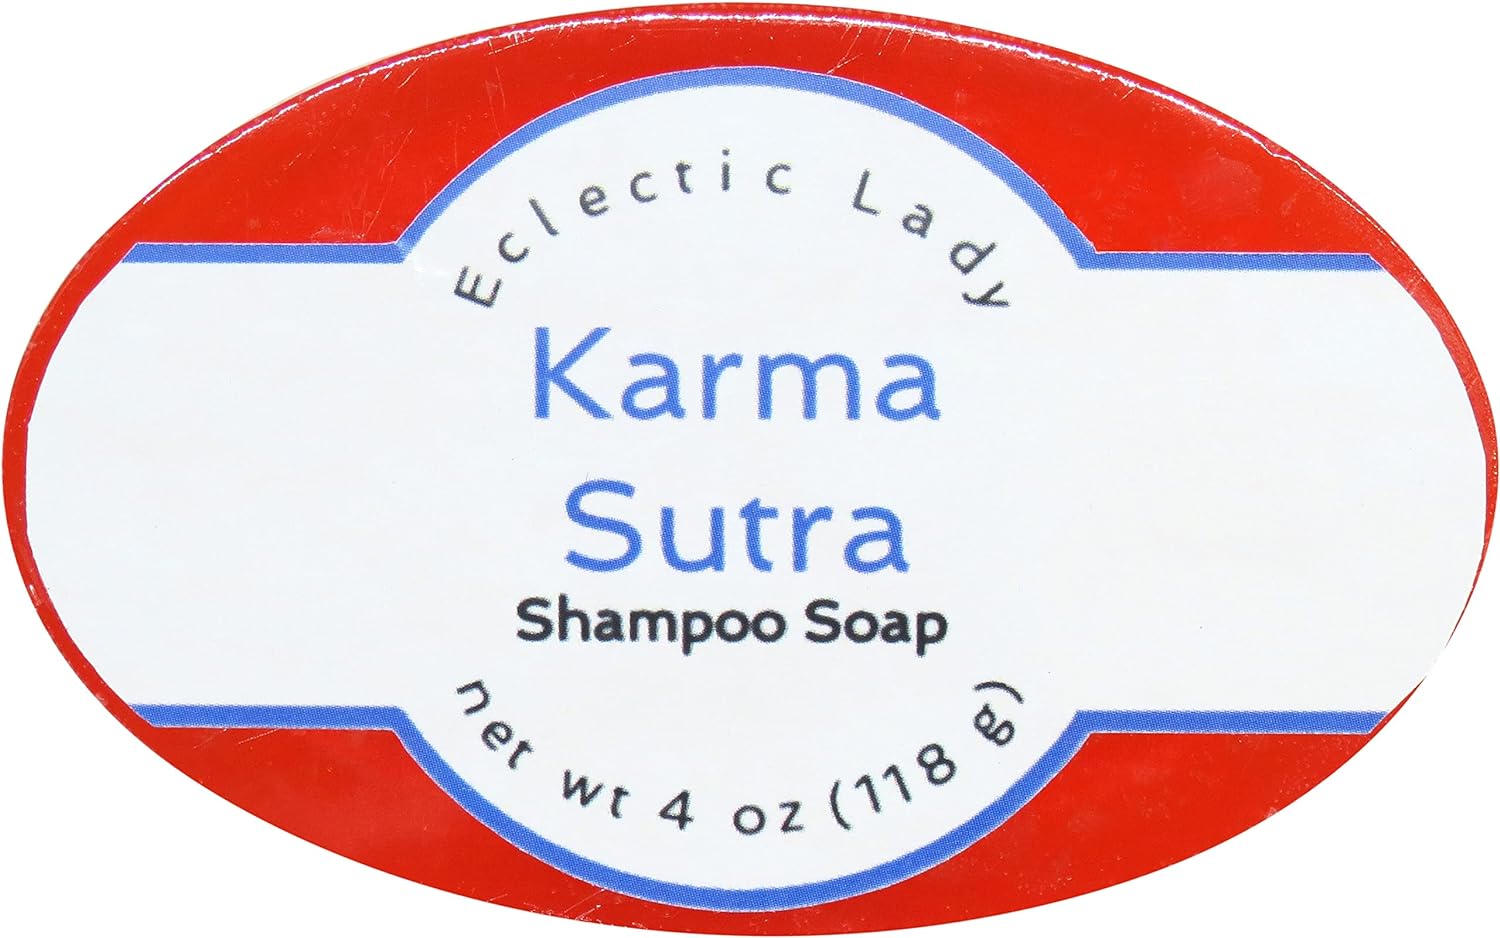 Eclectic Lady Karma Sutra Shampoo Soap Bar with Pure Argan Oil, Silk Protein, Honey Protein and Extracts of Calendula ower, Aloe, Carrageenan, Sunower - 4  Bar